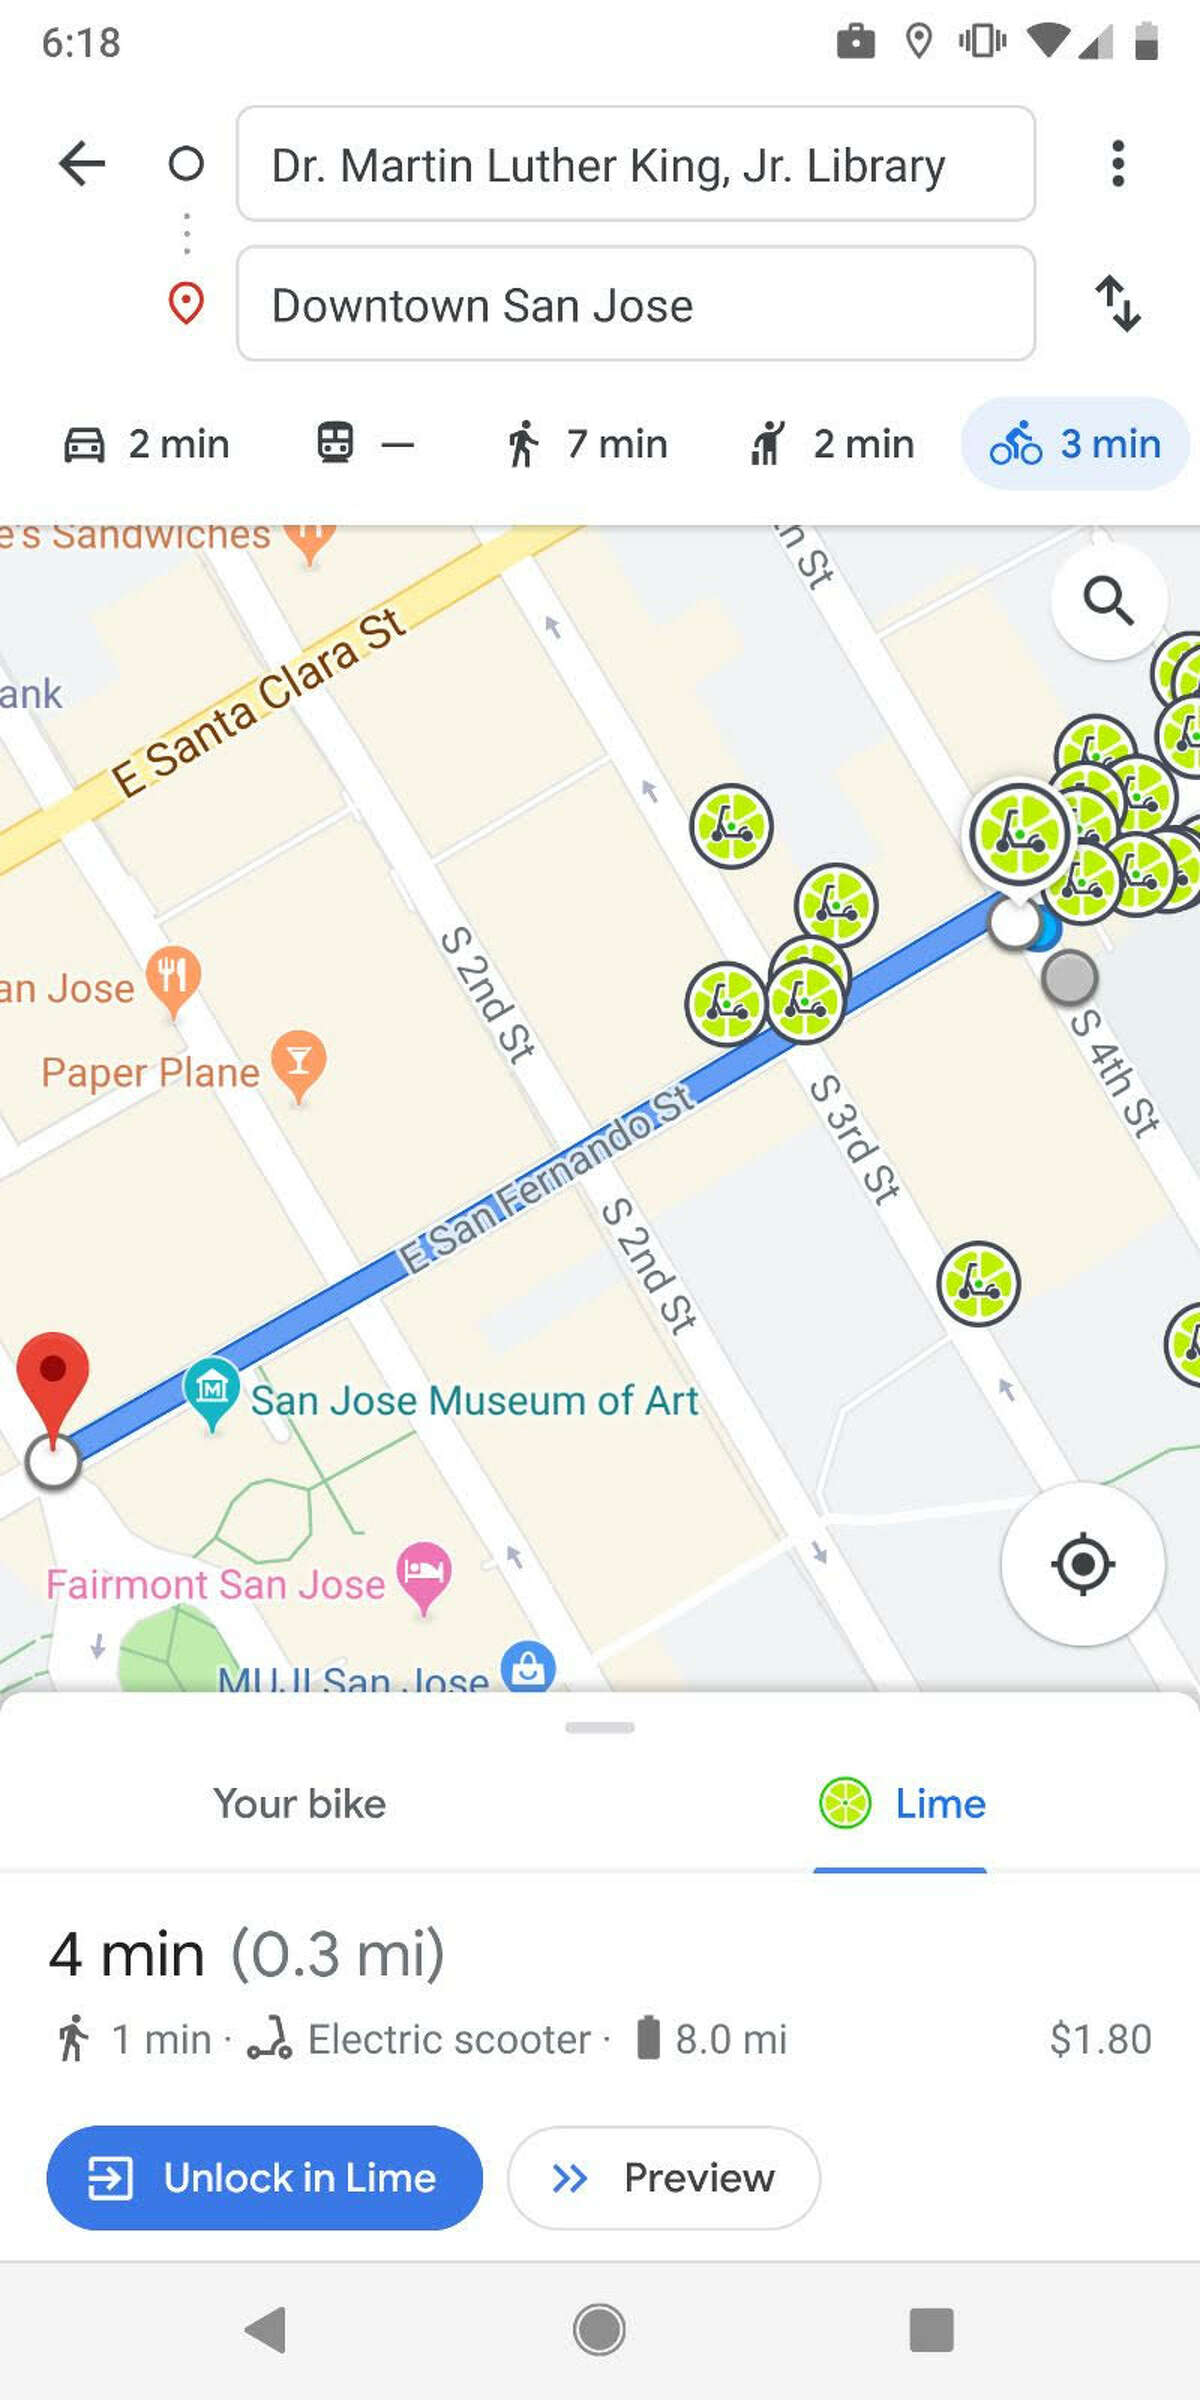 Google Maps is teaming up with Lime to show cell phone users where they can find available Lime scooters.